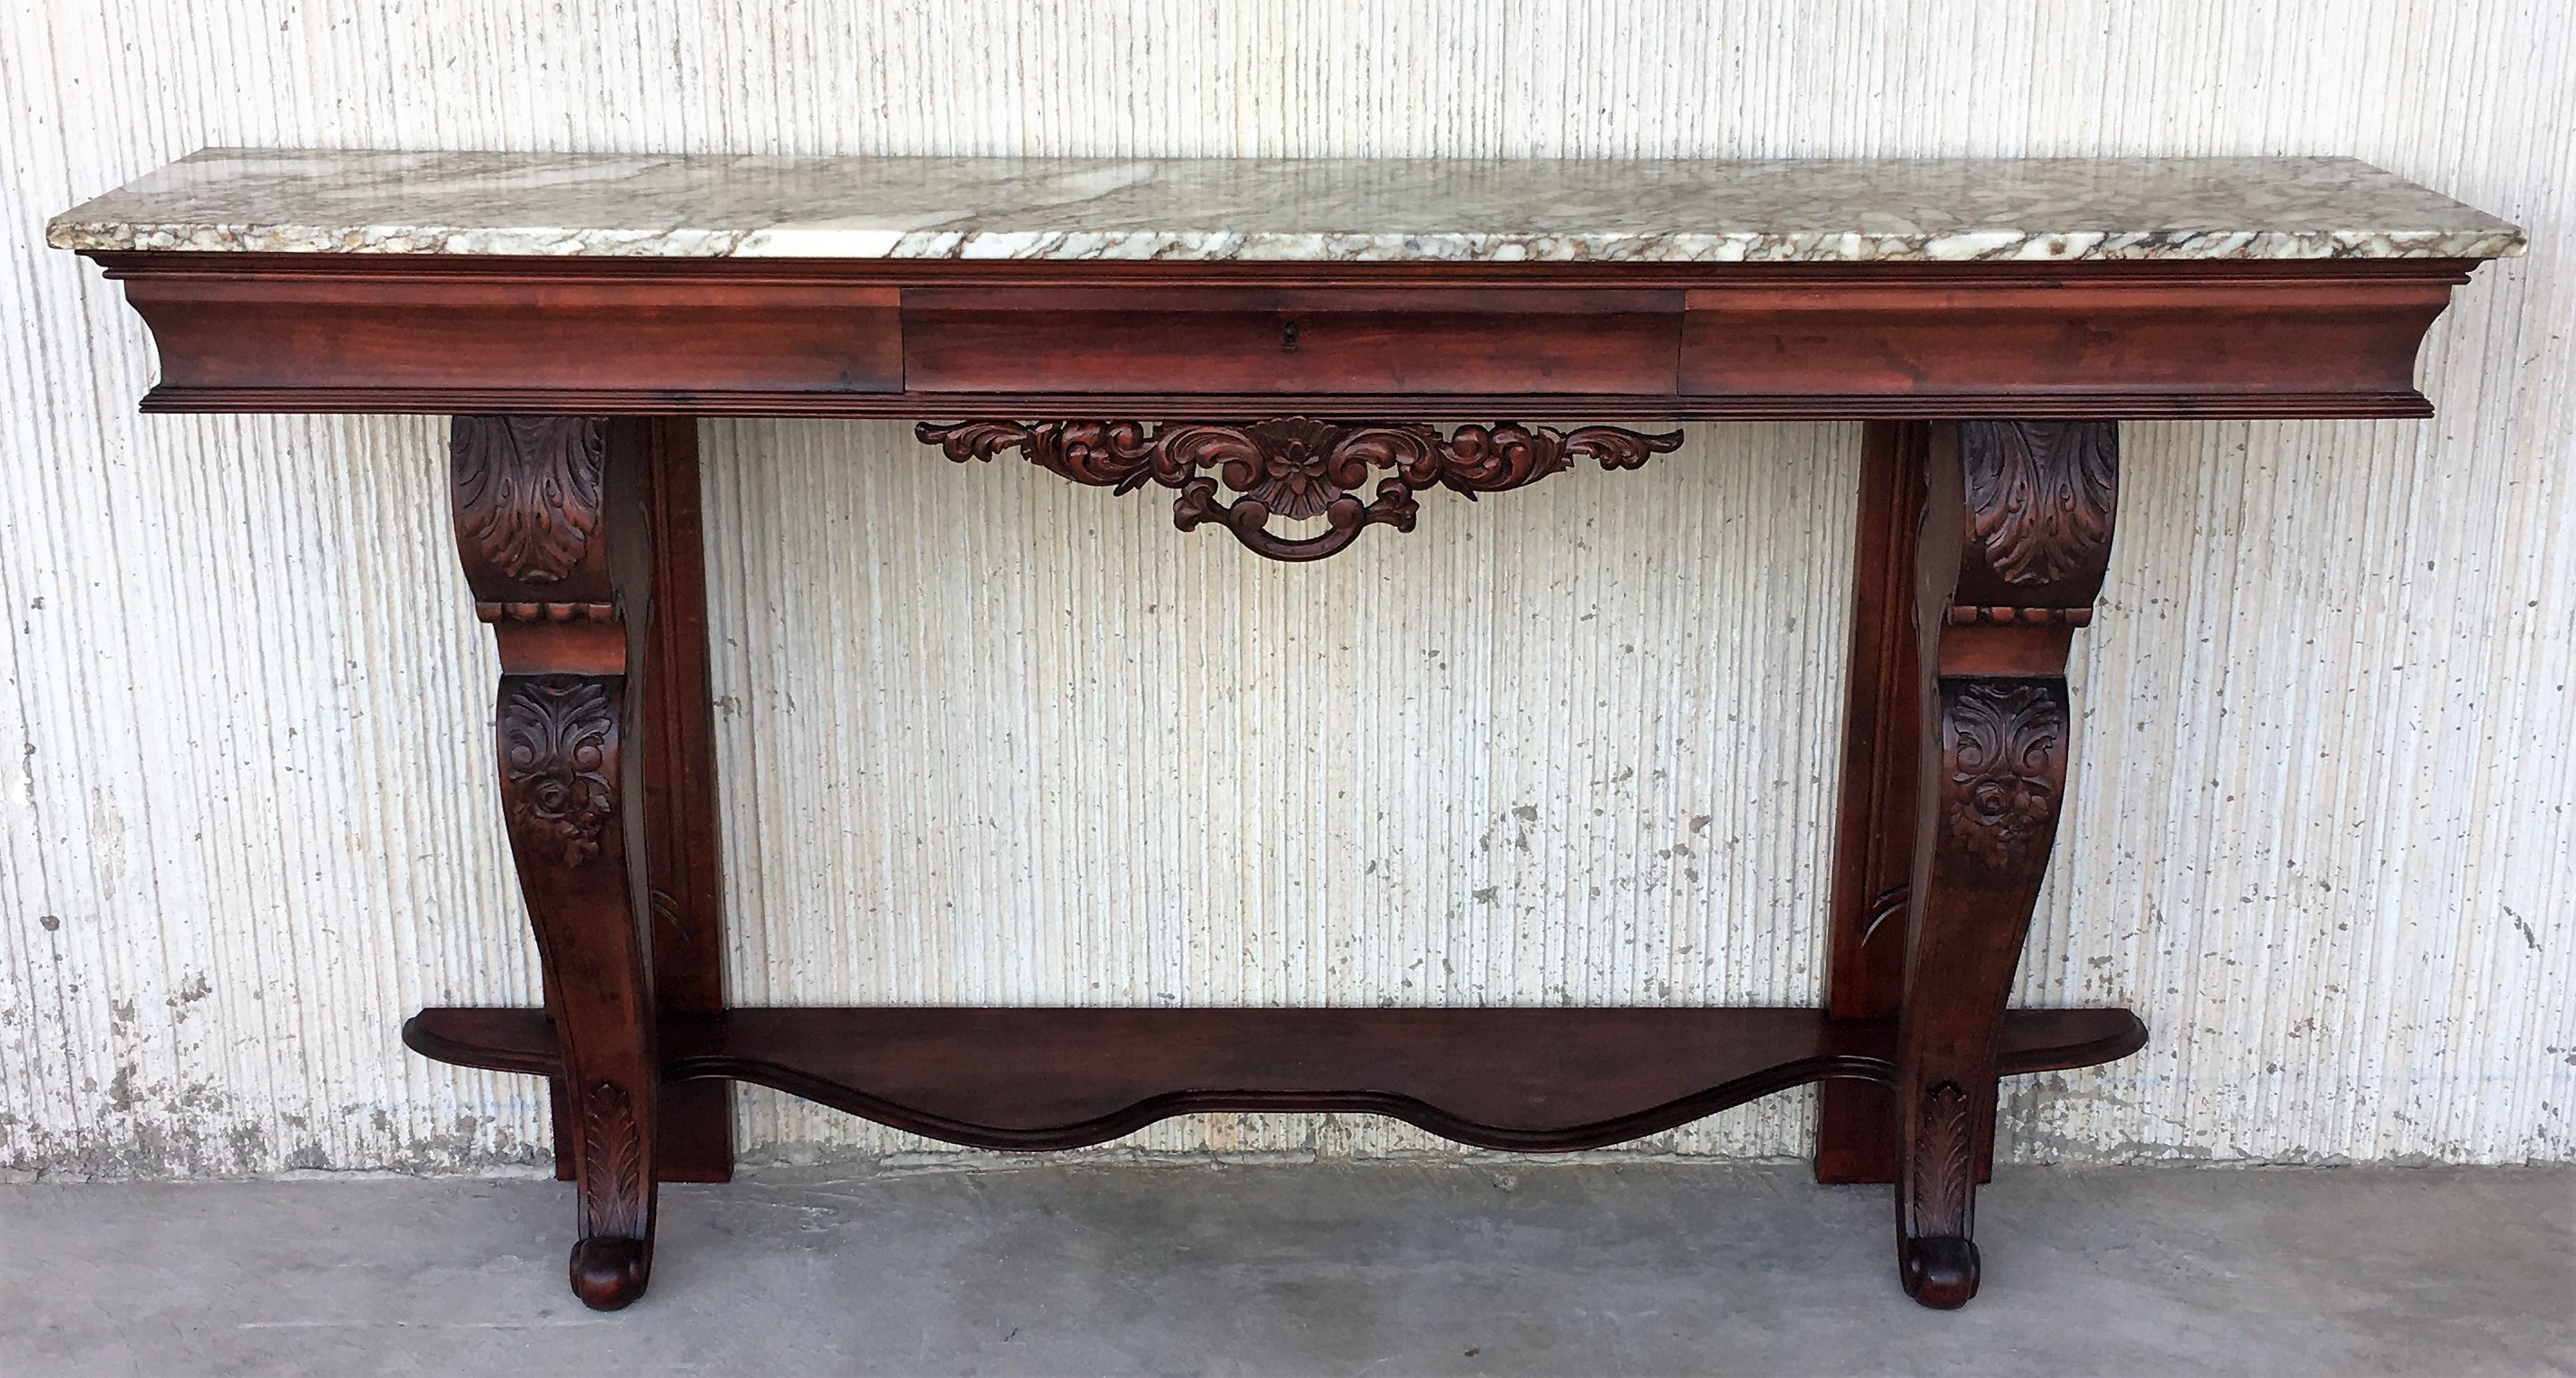 19th century carved mahogany console with marble top and central drawer.